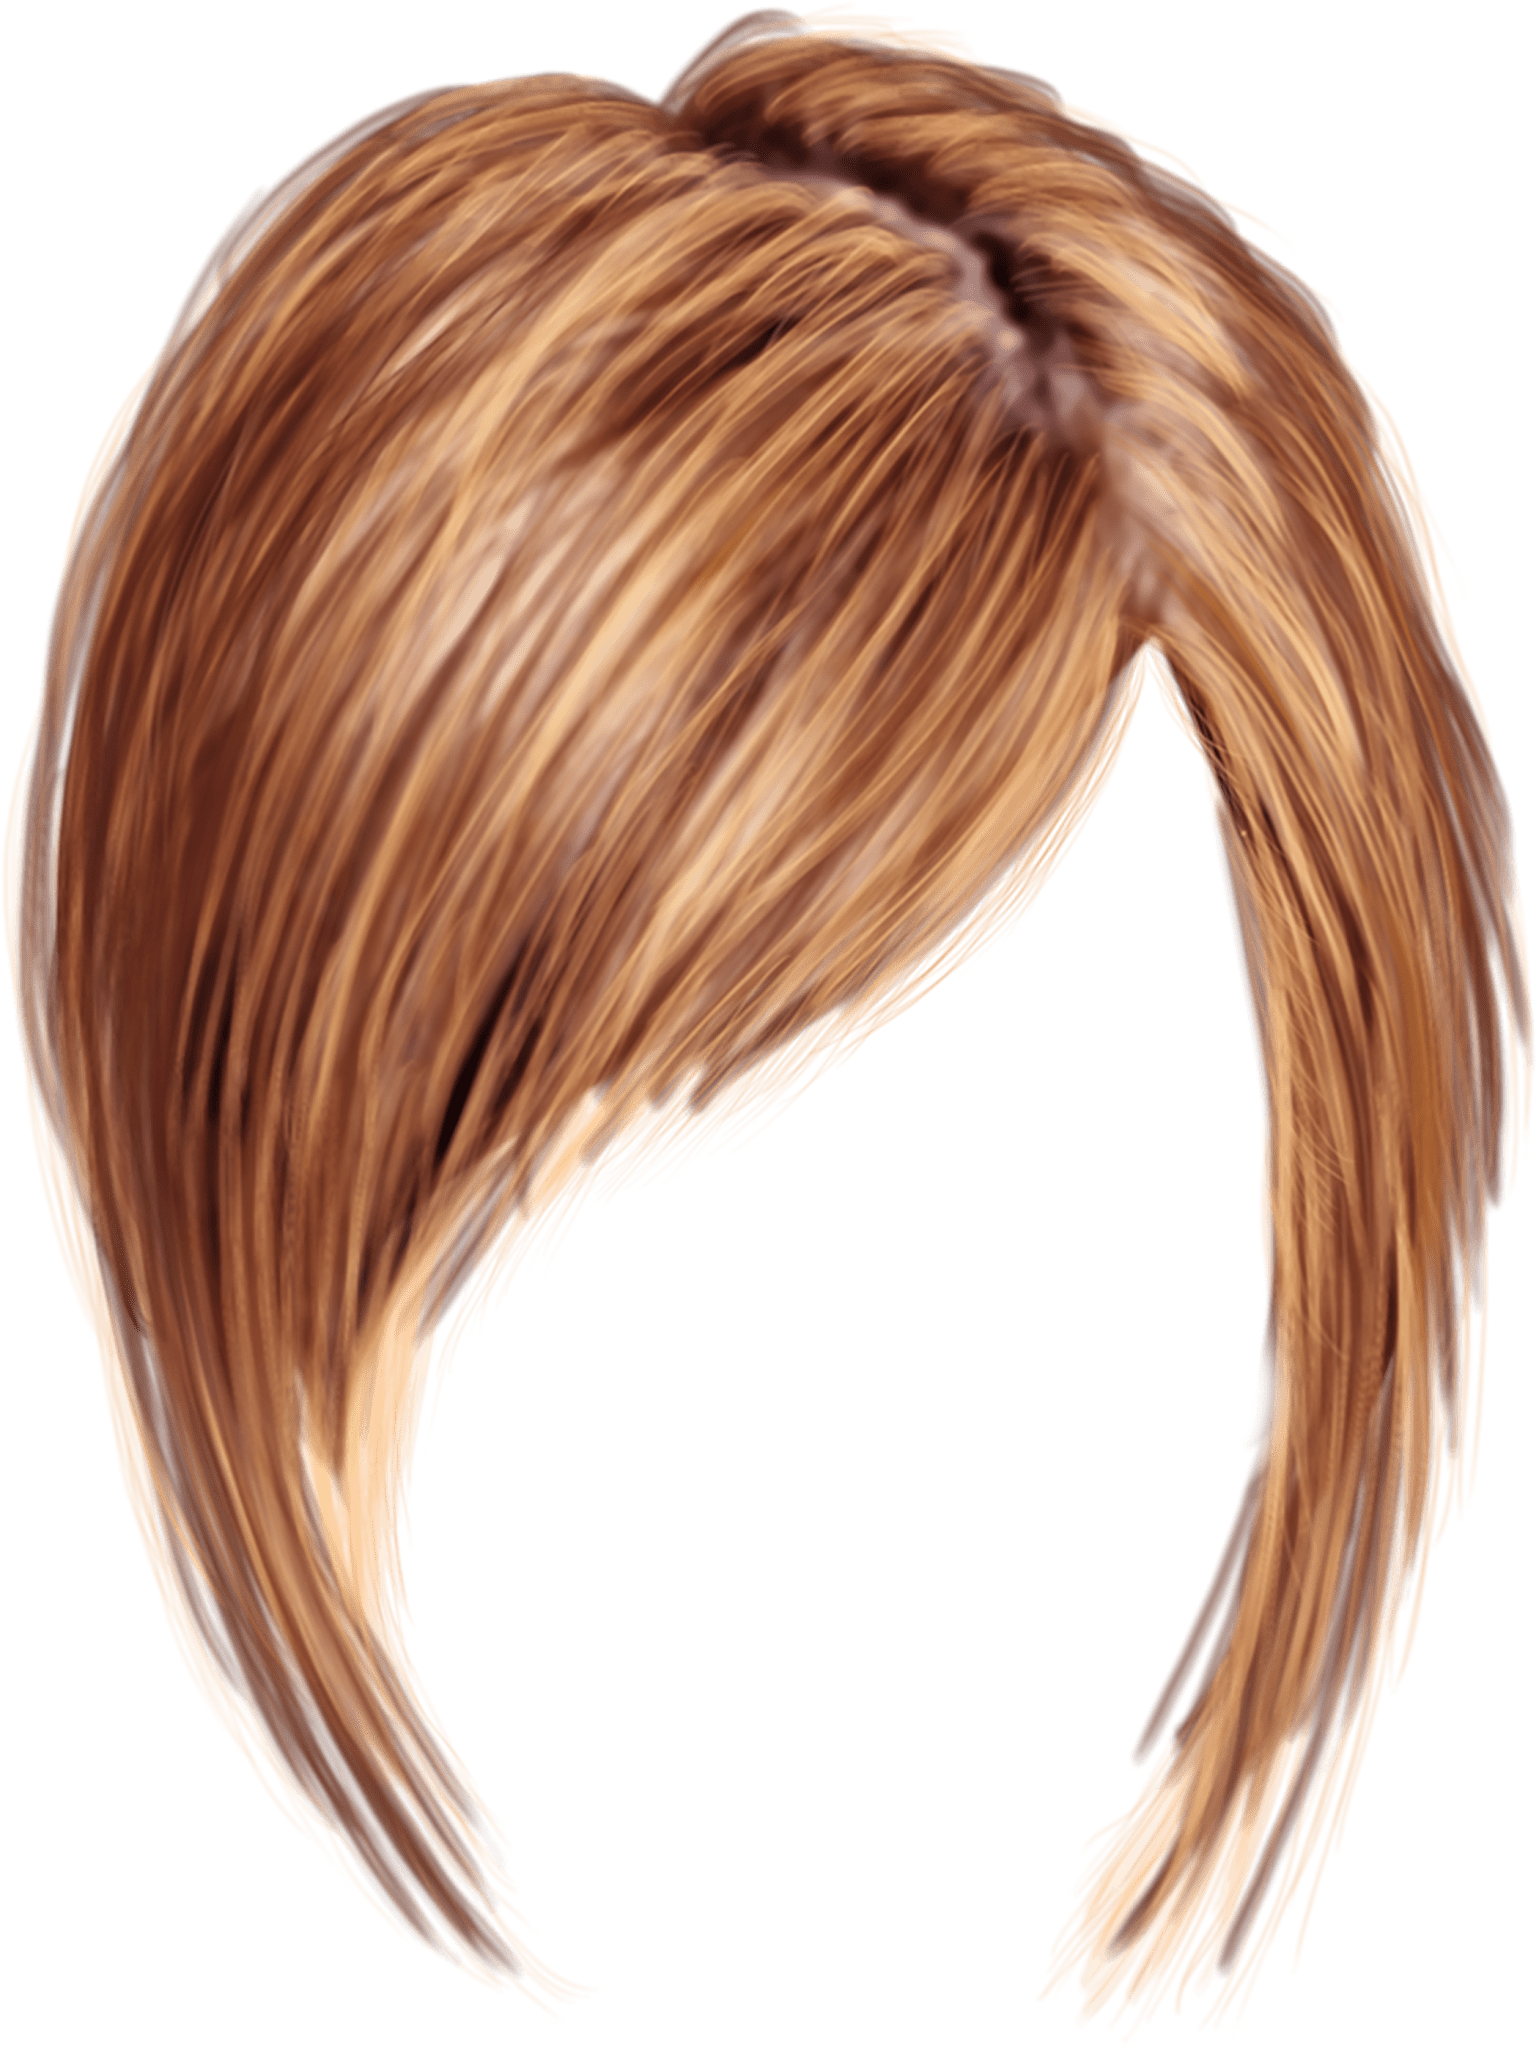 Hair Cutting Blond PNG Images Transparent Background | PNG Play